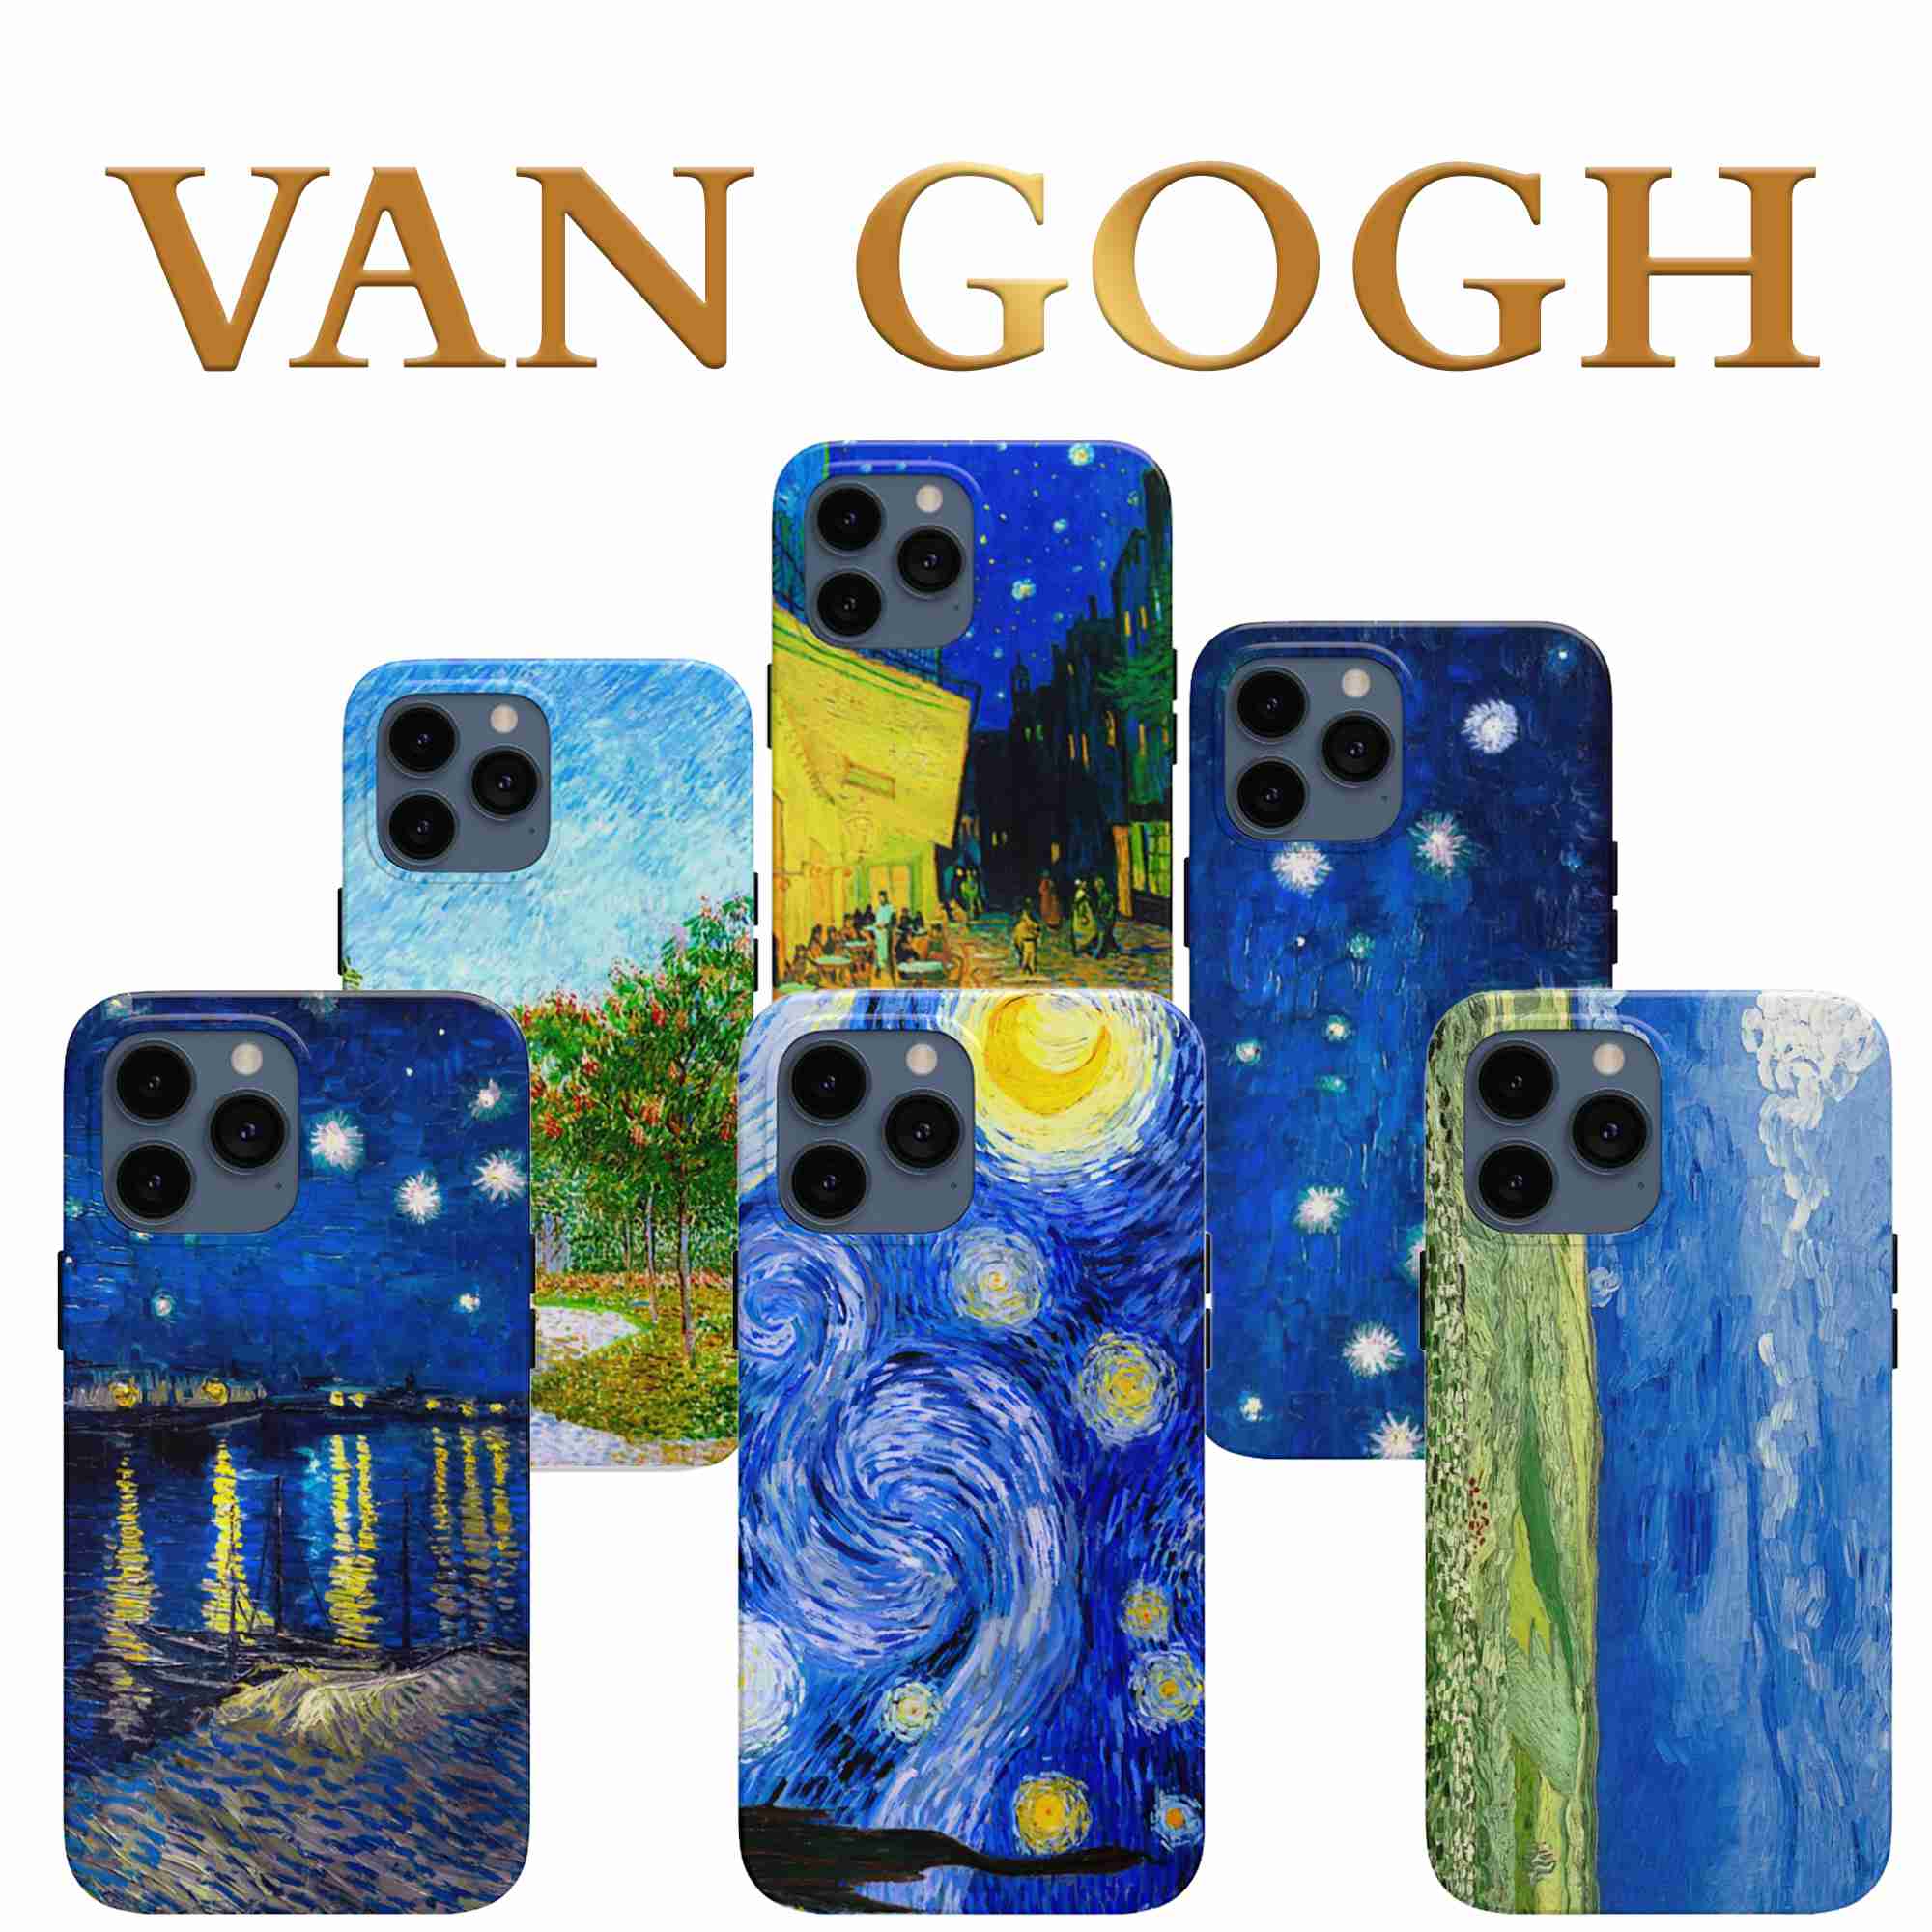 vincent-van-gogh-phone-case-aesthetic-iphone-starry-night-13 with cash back rebate